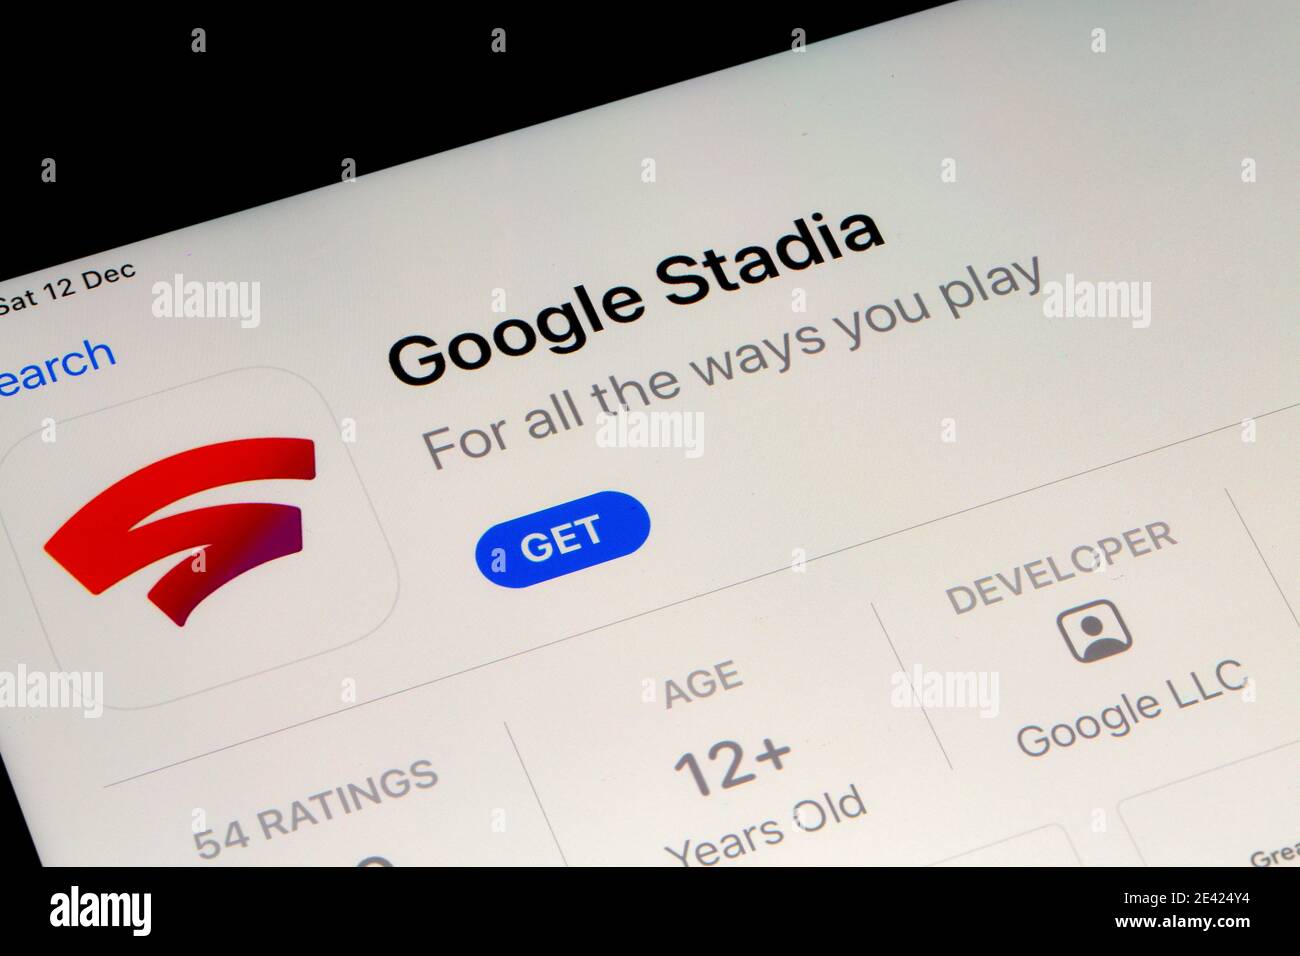 Ostersund, Sweden - Dec 12, 2020: Google Stadia app on ipad. Stadia is a cloud gaming service developed and operated by Google. Stock Photo